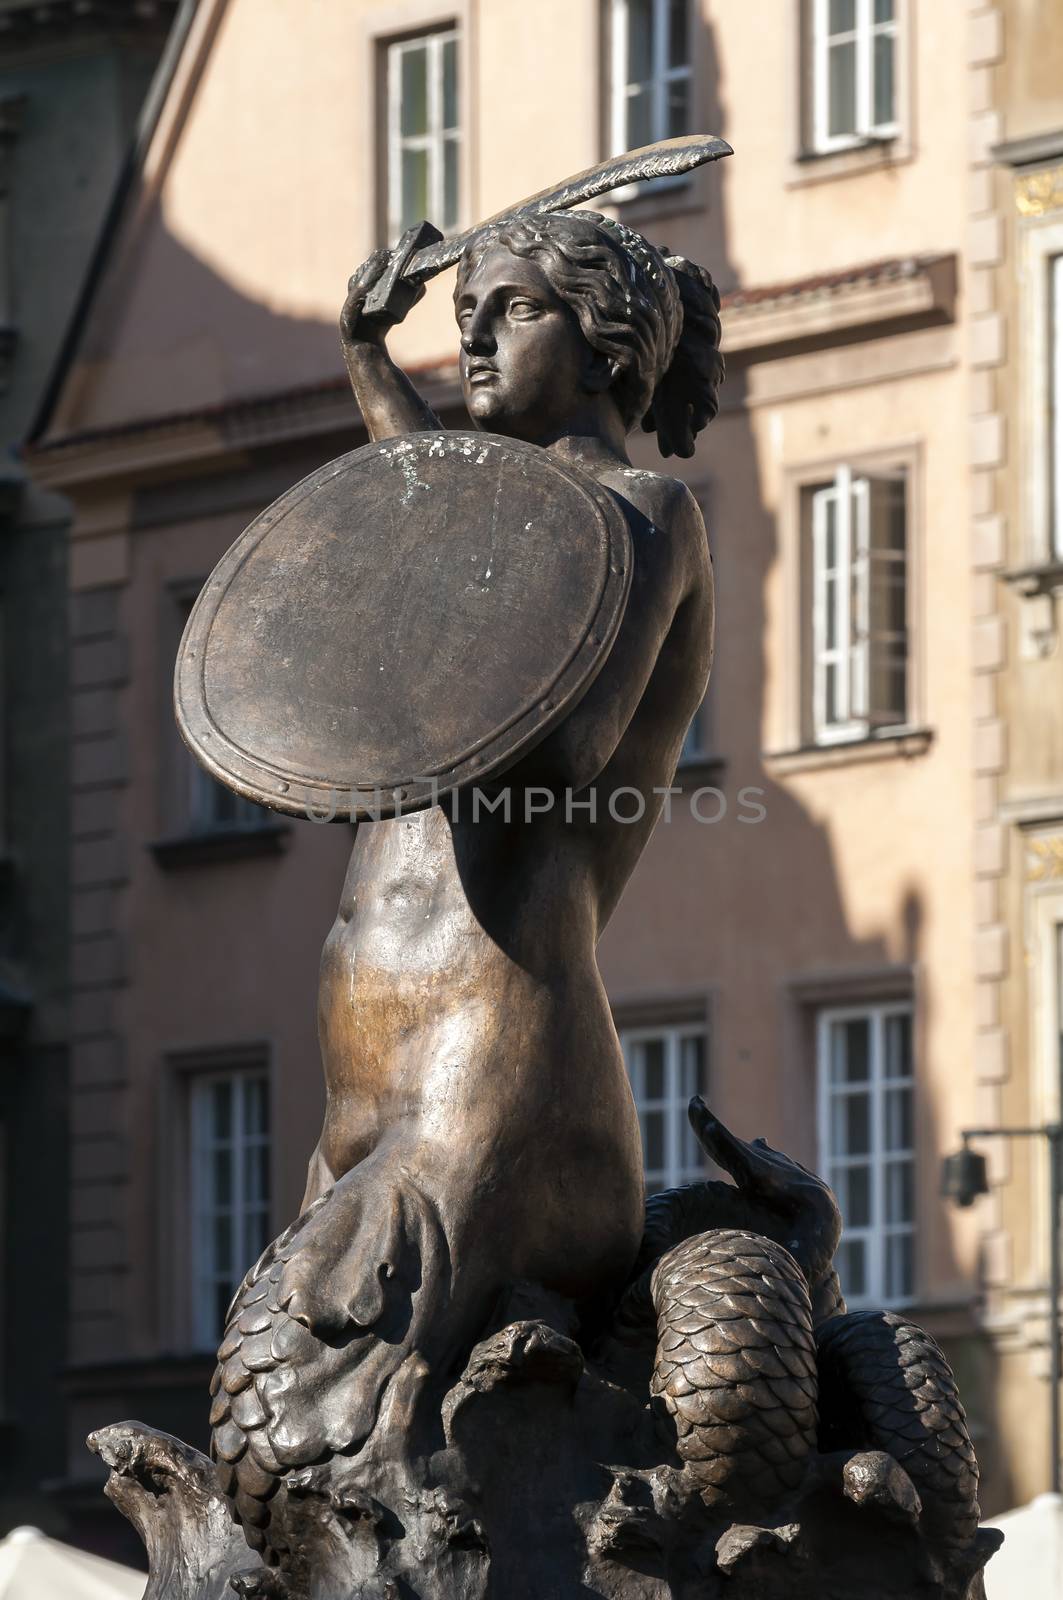 Mermaid statue in Warsaw. by FER737NG